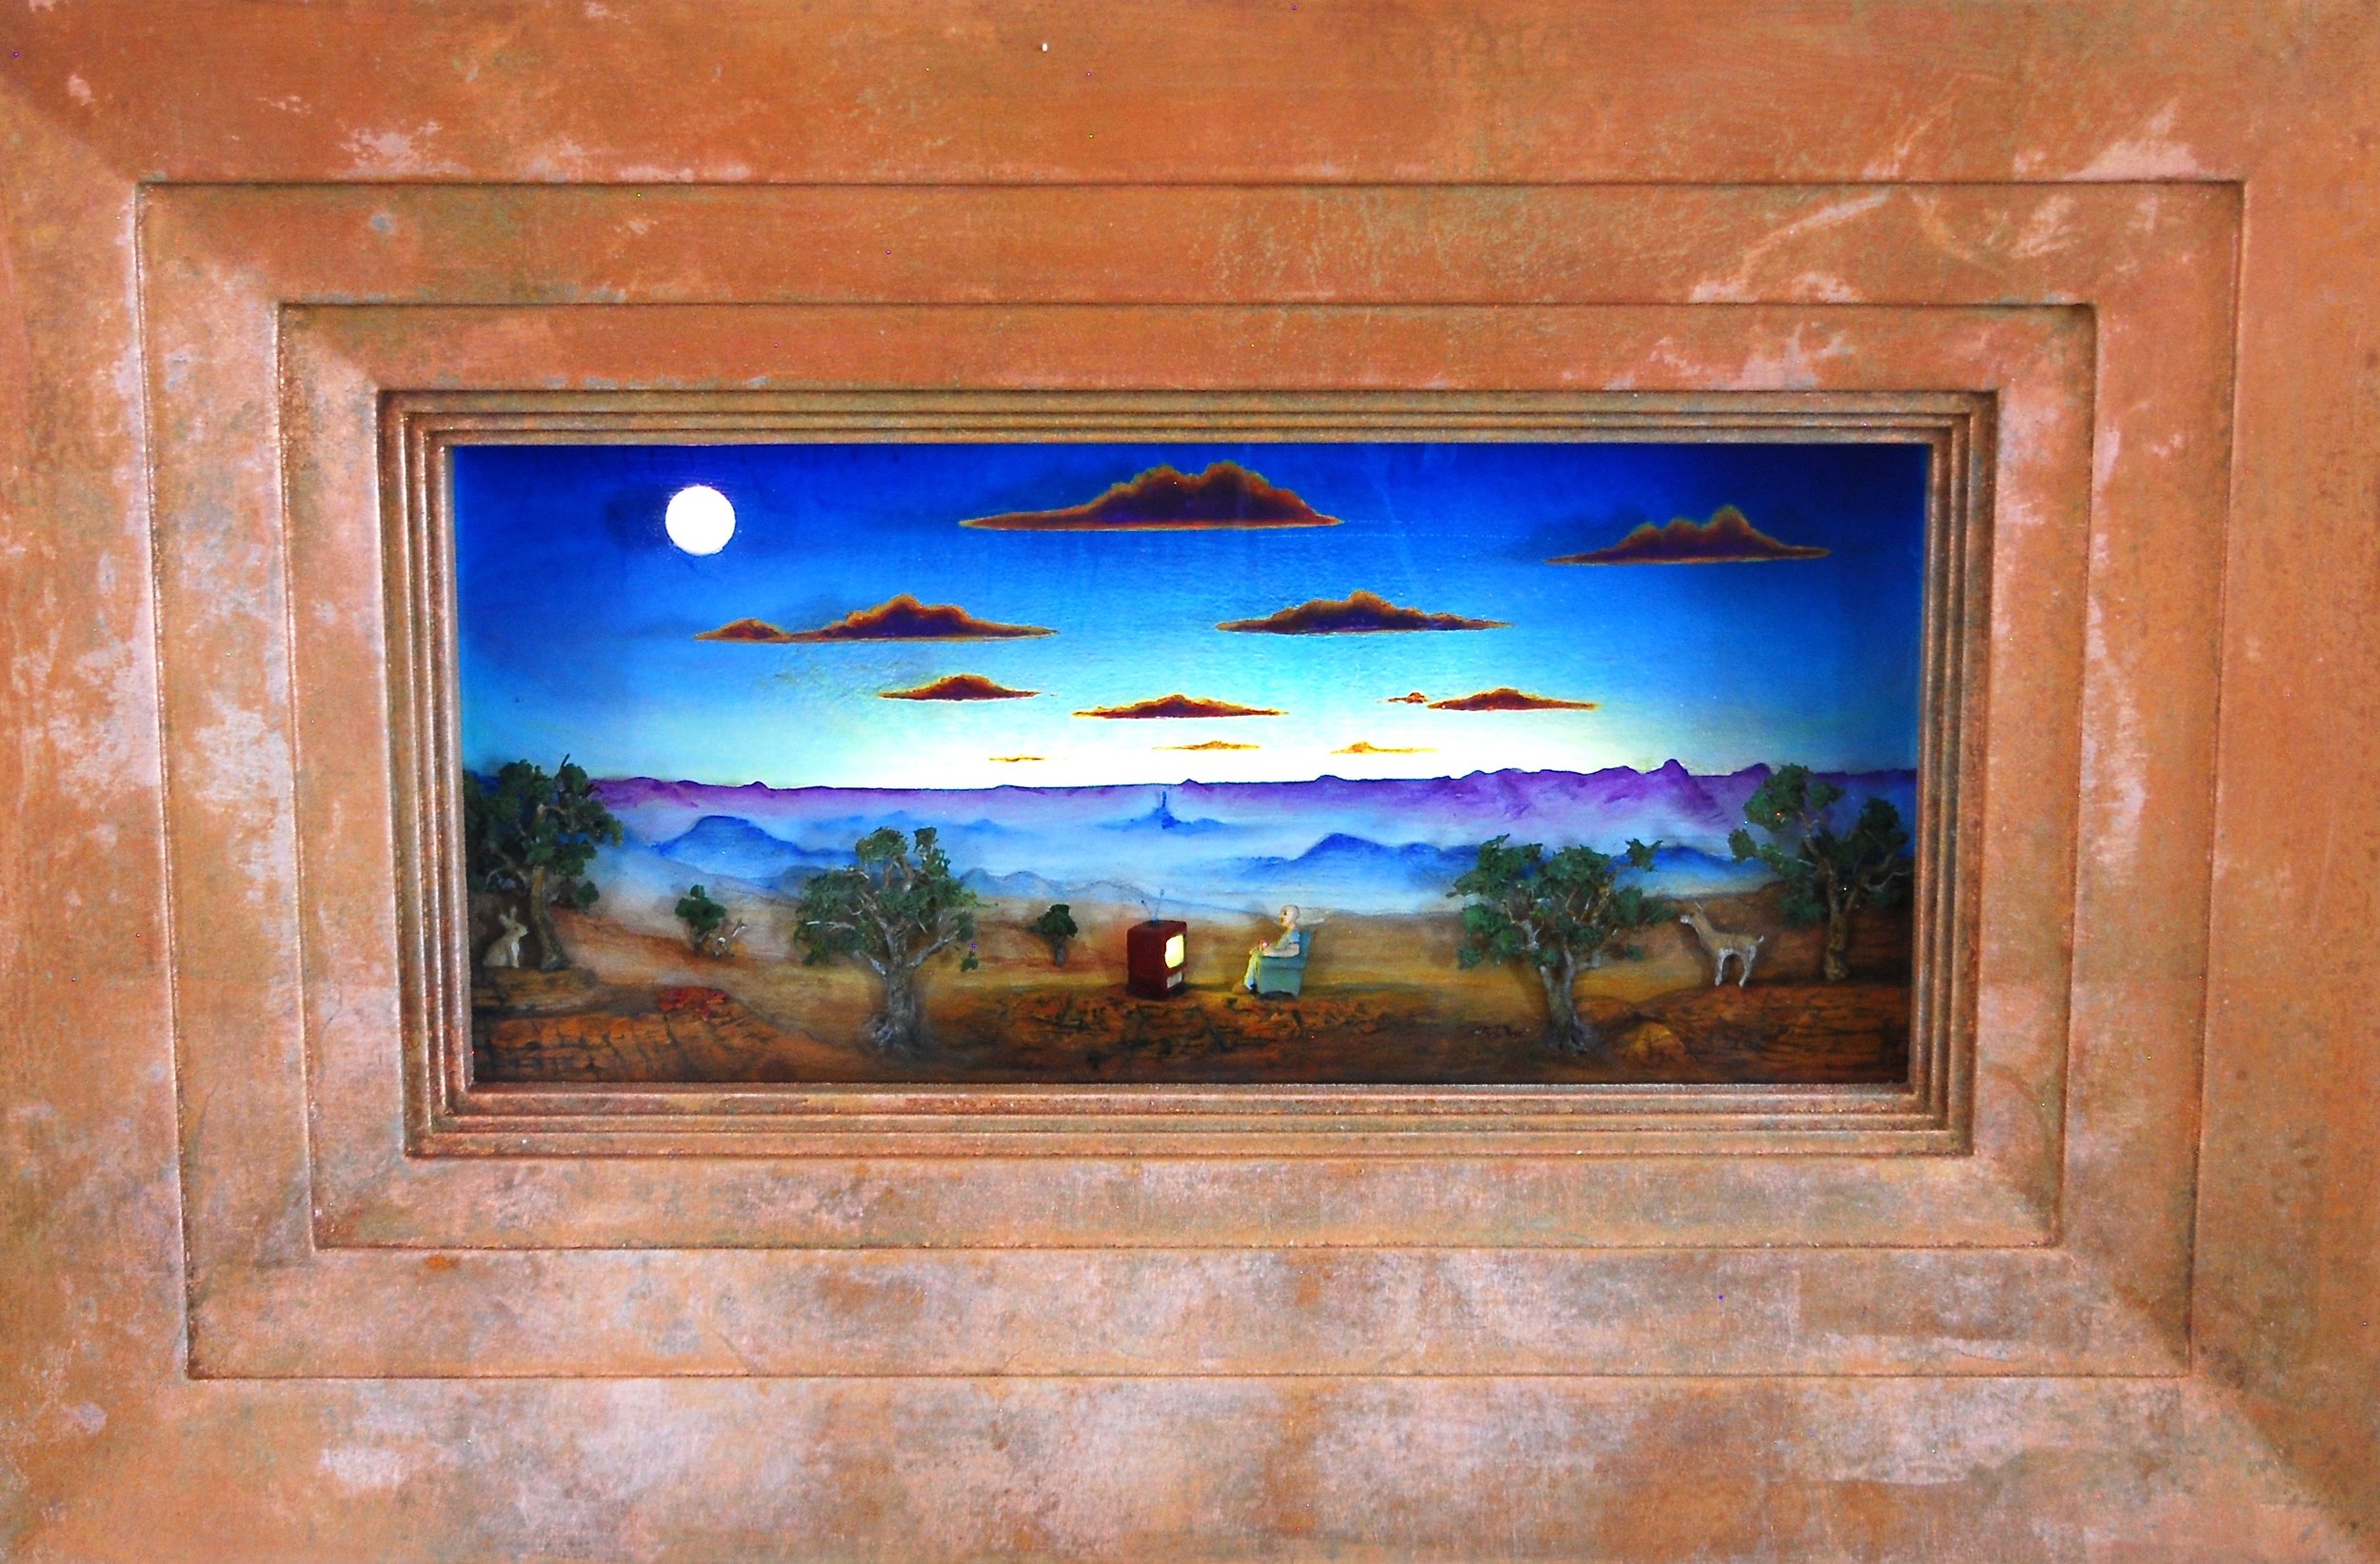   Thomas Coffin - Lots Of Good Shows Tonight, 15"h x 22"w x 4 1/2"d, mixed media 3-d diorama encased in acrylic resin, handmade wood frame, copper leaf  